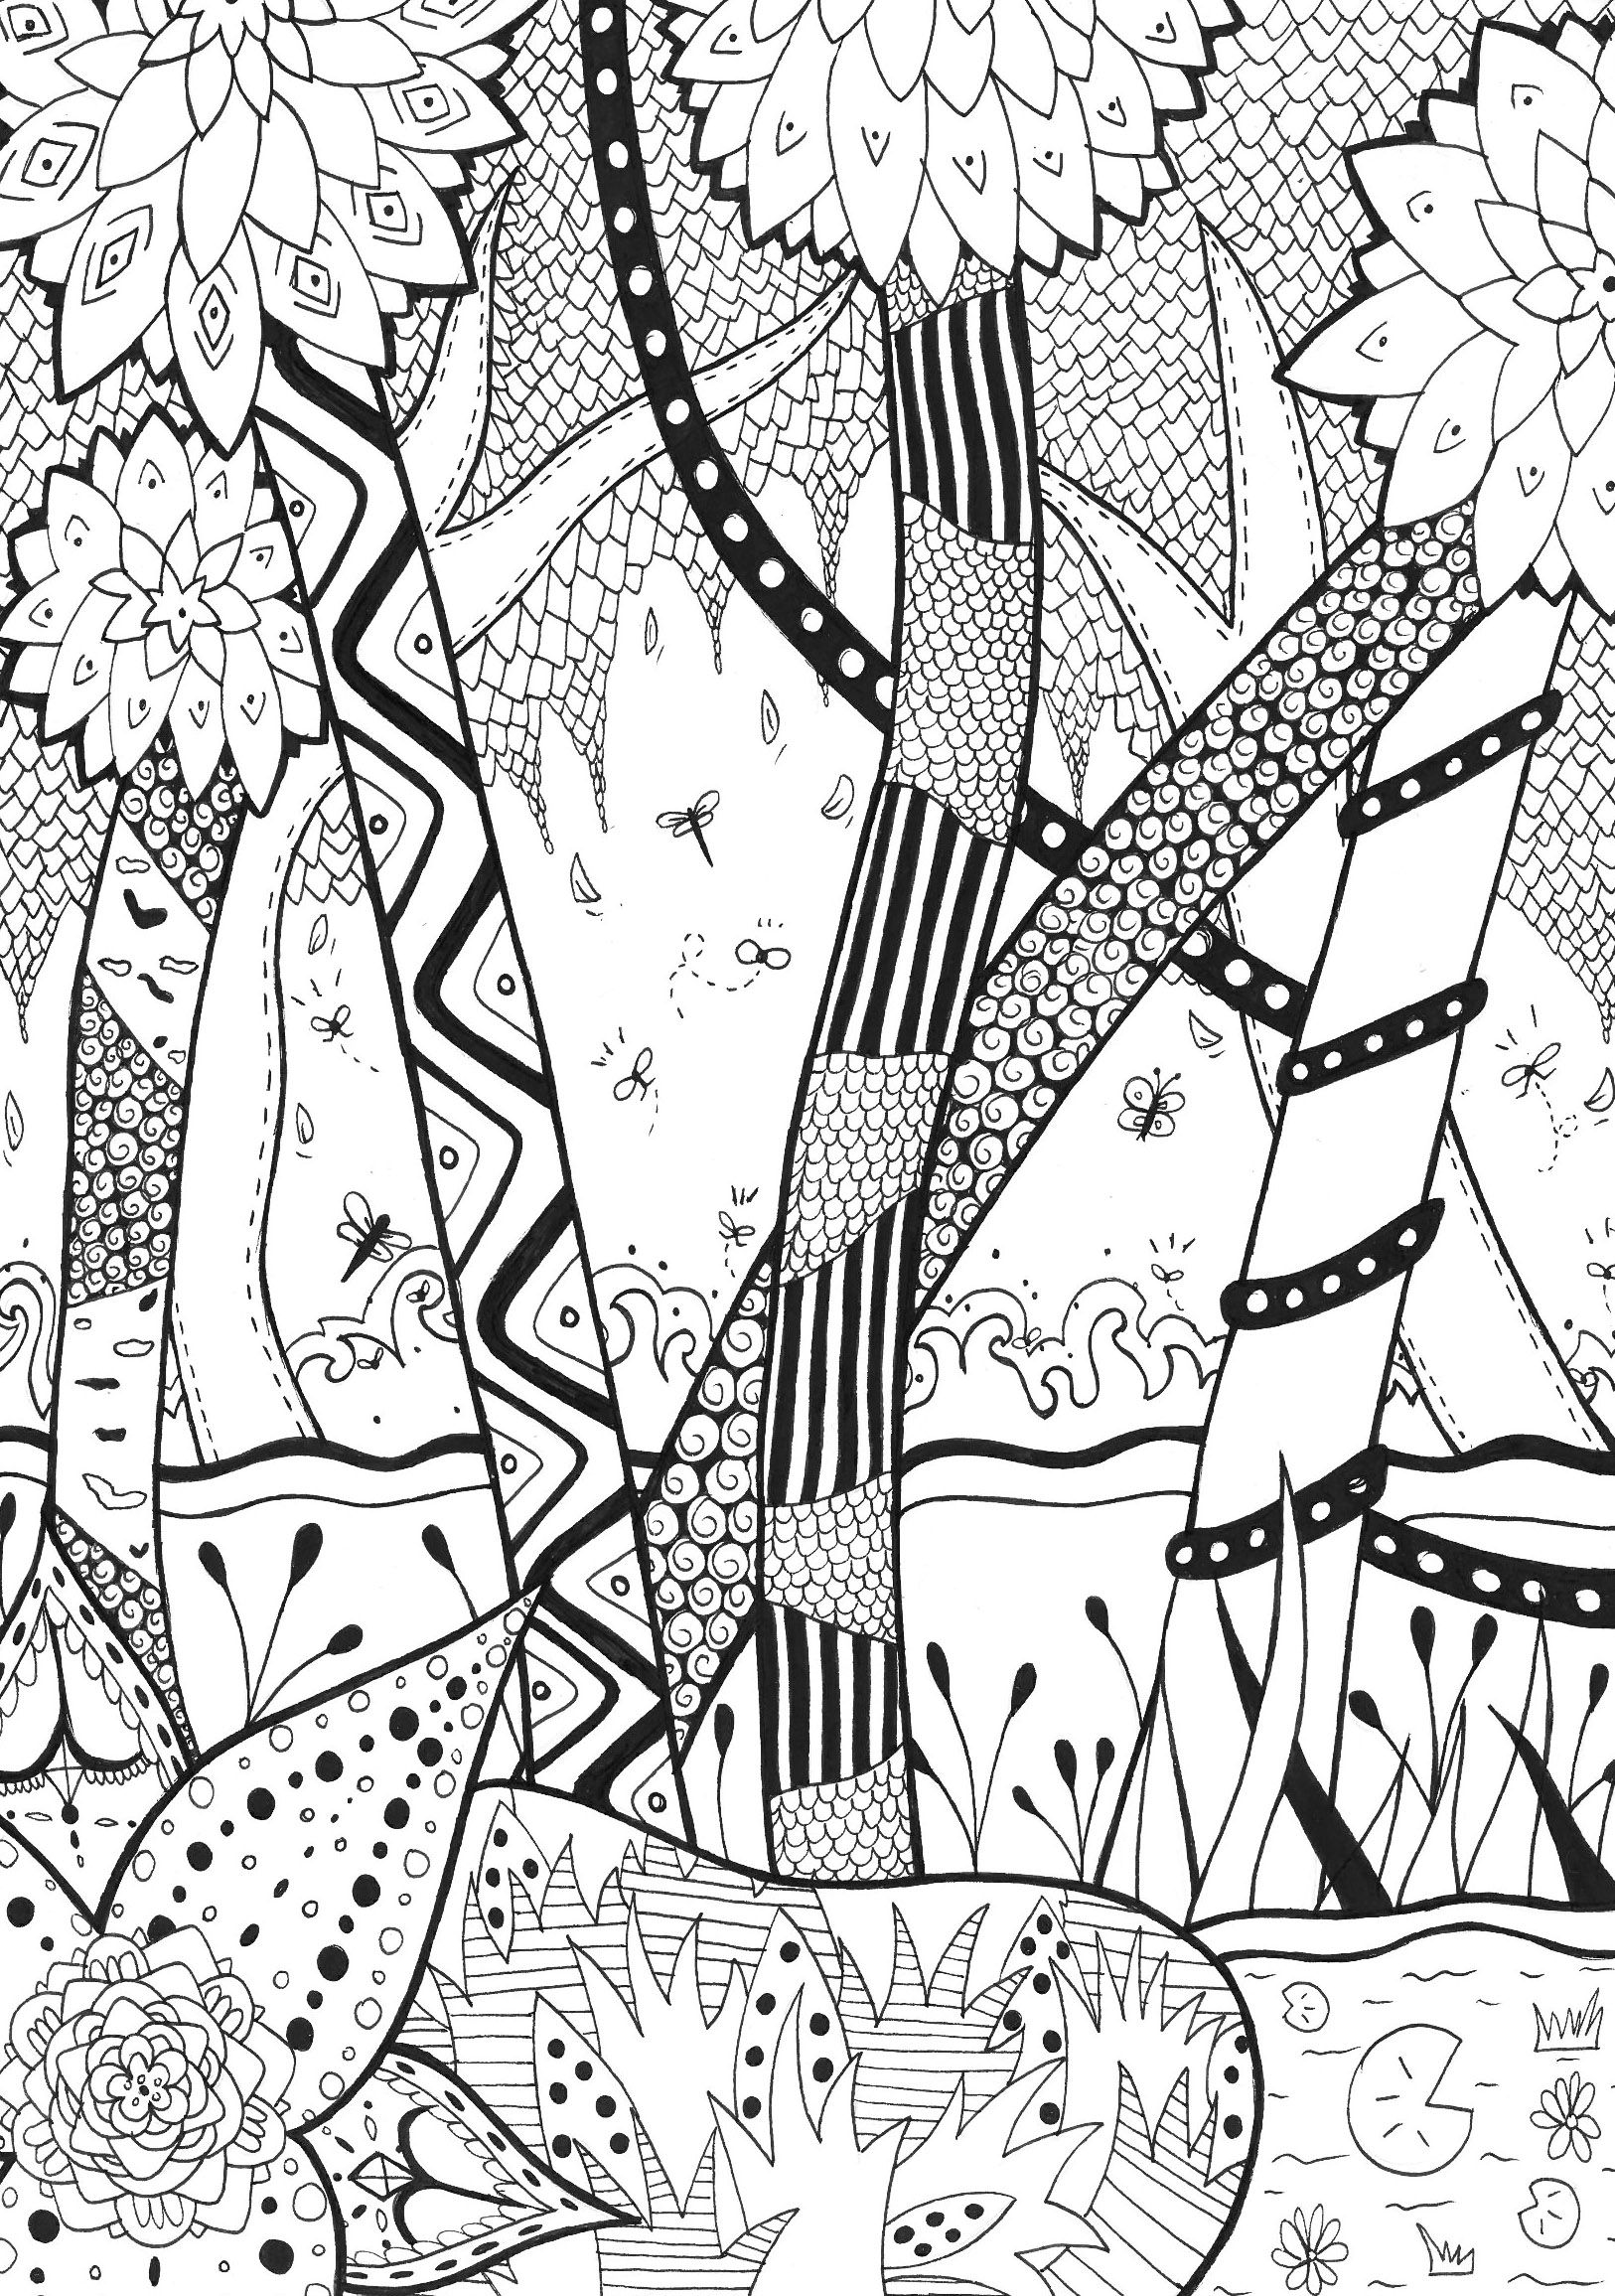 Jungle & Forest - Coloring Pages for adults